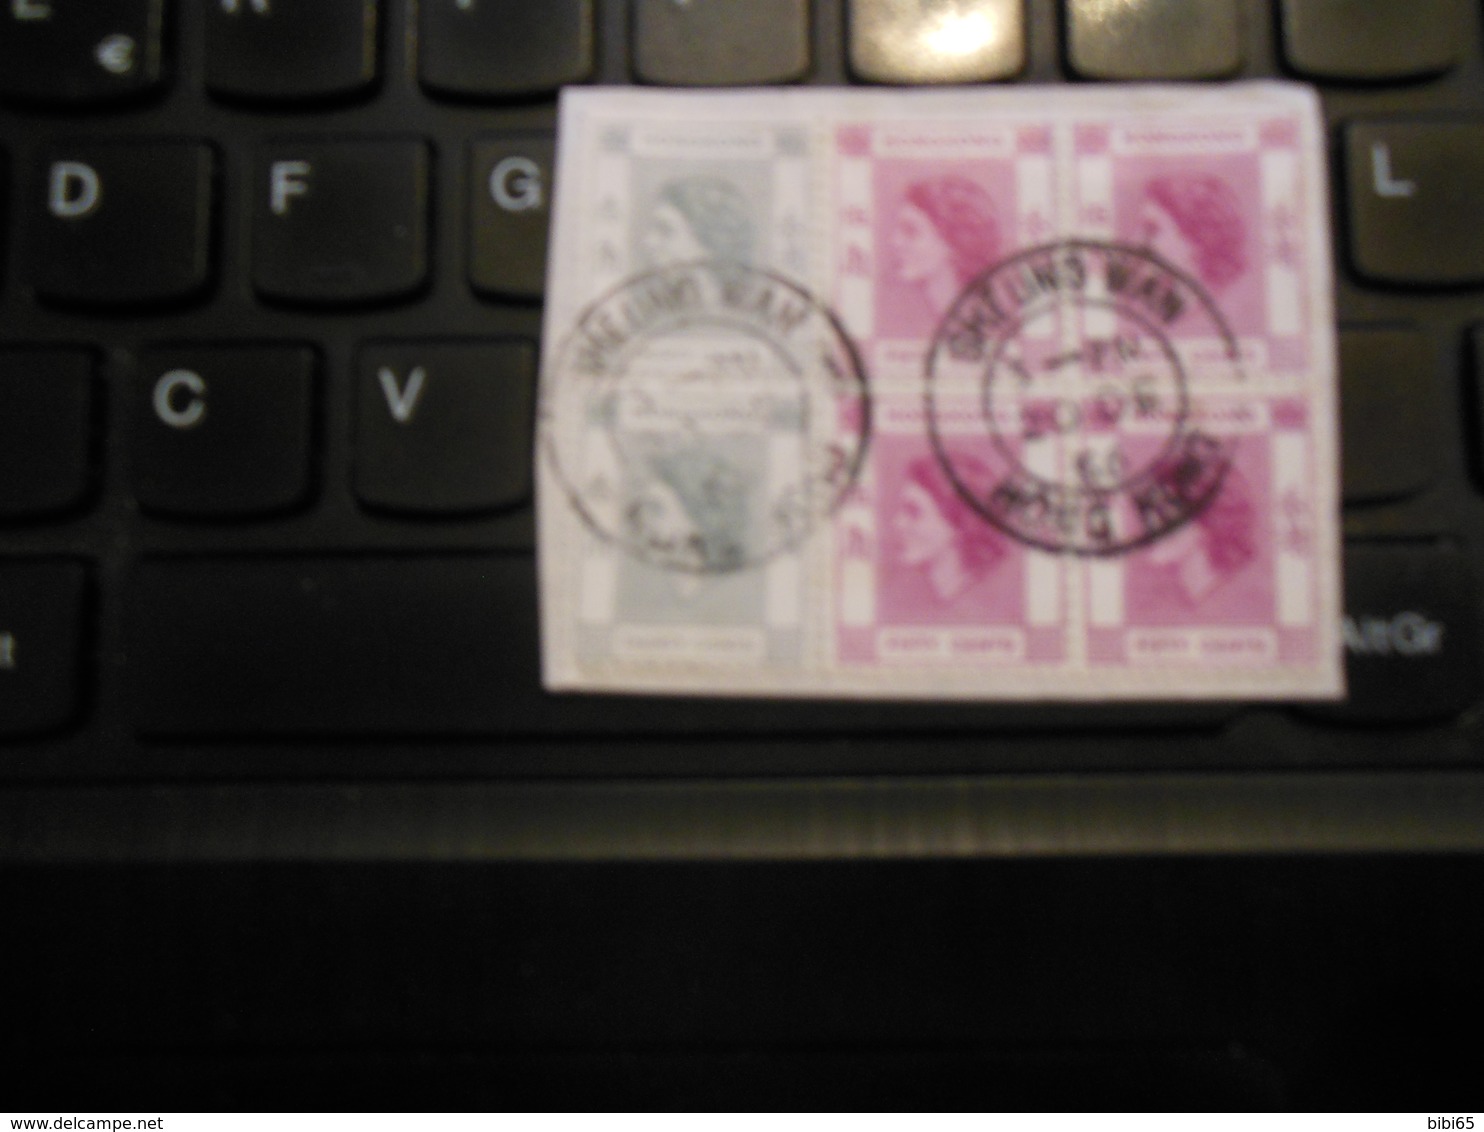 SHEUNG WAN 20 DEC 3-PM 56 FIFTY CENTS BLOCK OF FOUR PAIR OF THIRTY CENTS VERY NICE - Cartas & Documentos